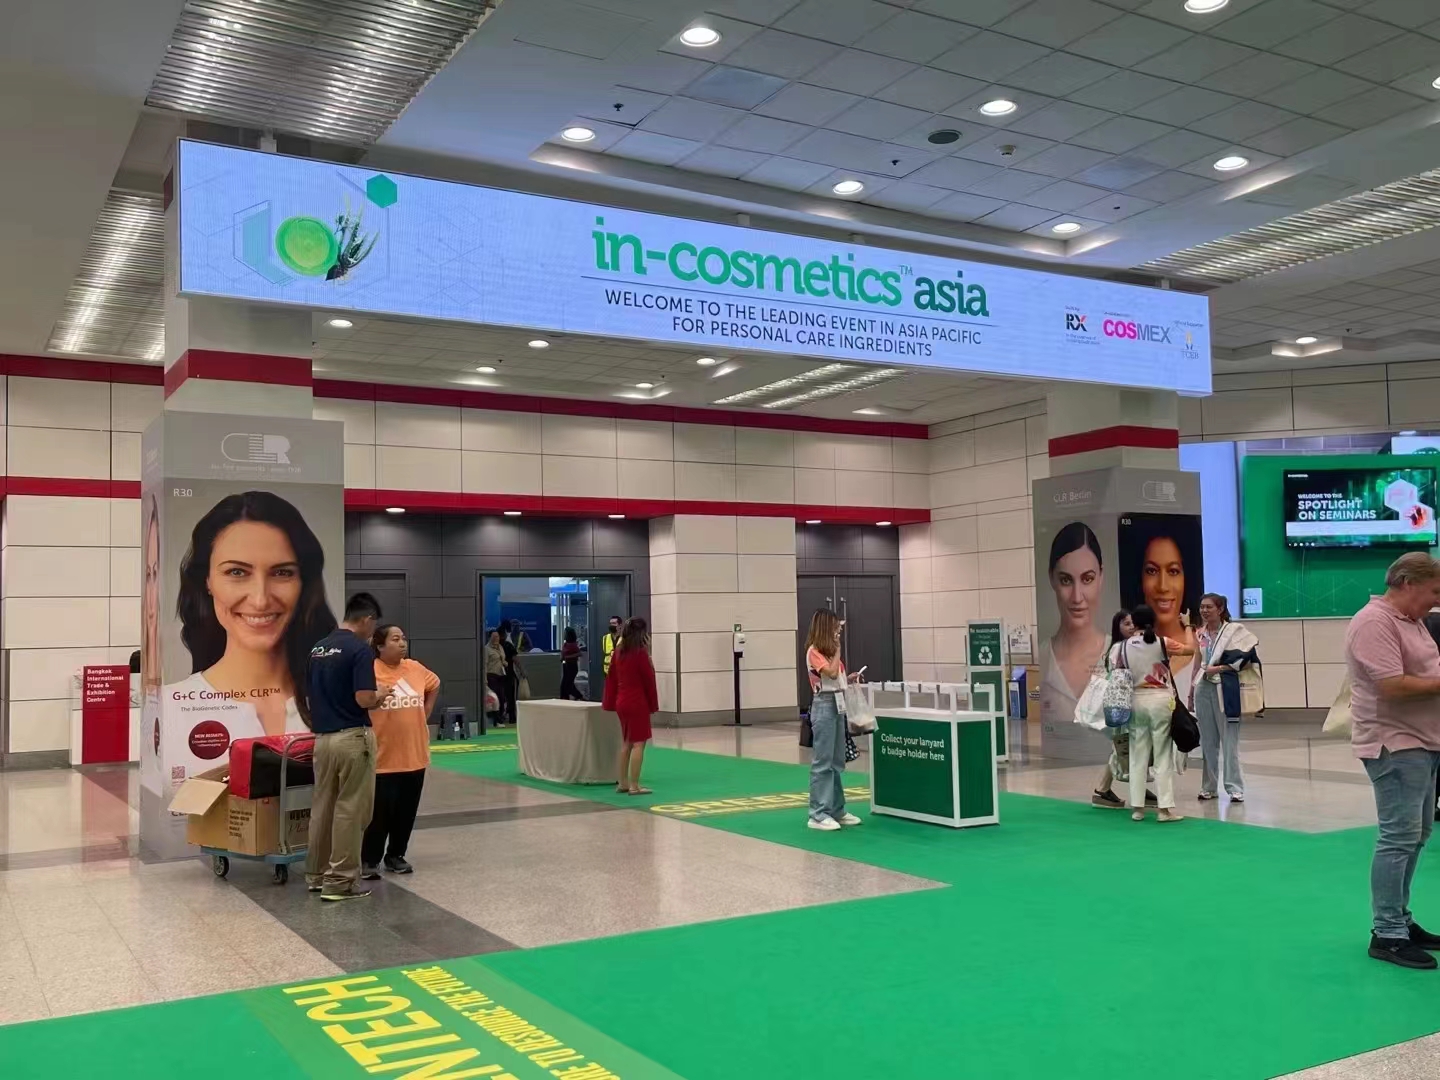 In-cosmetics Asia Bangkok ended successfully